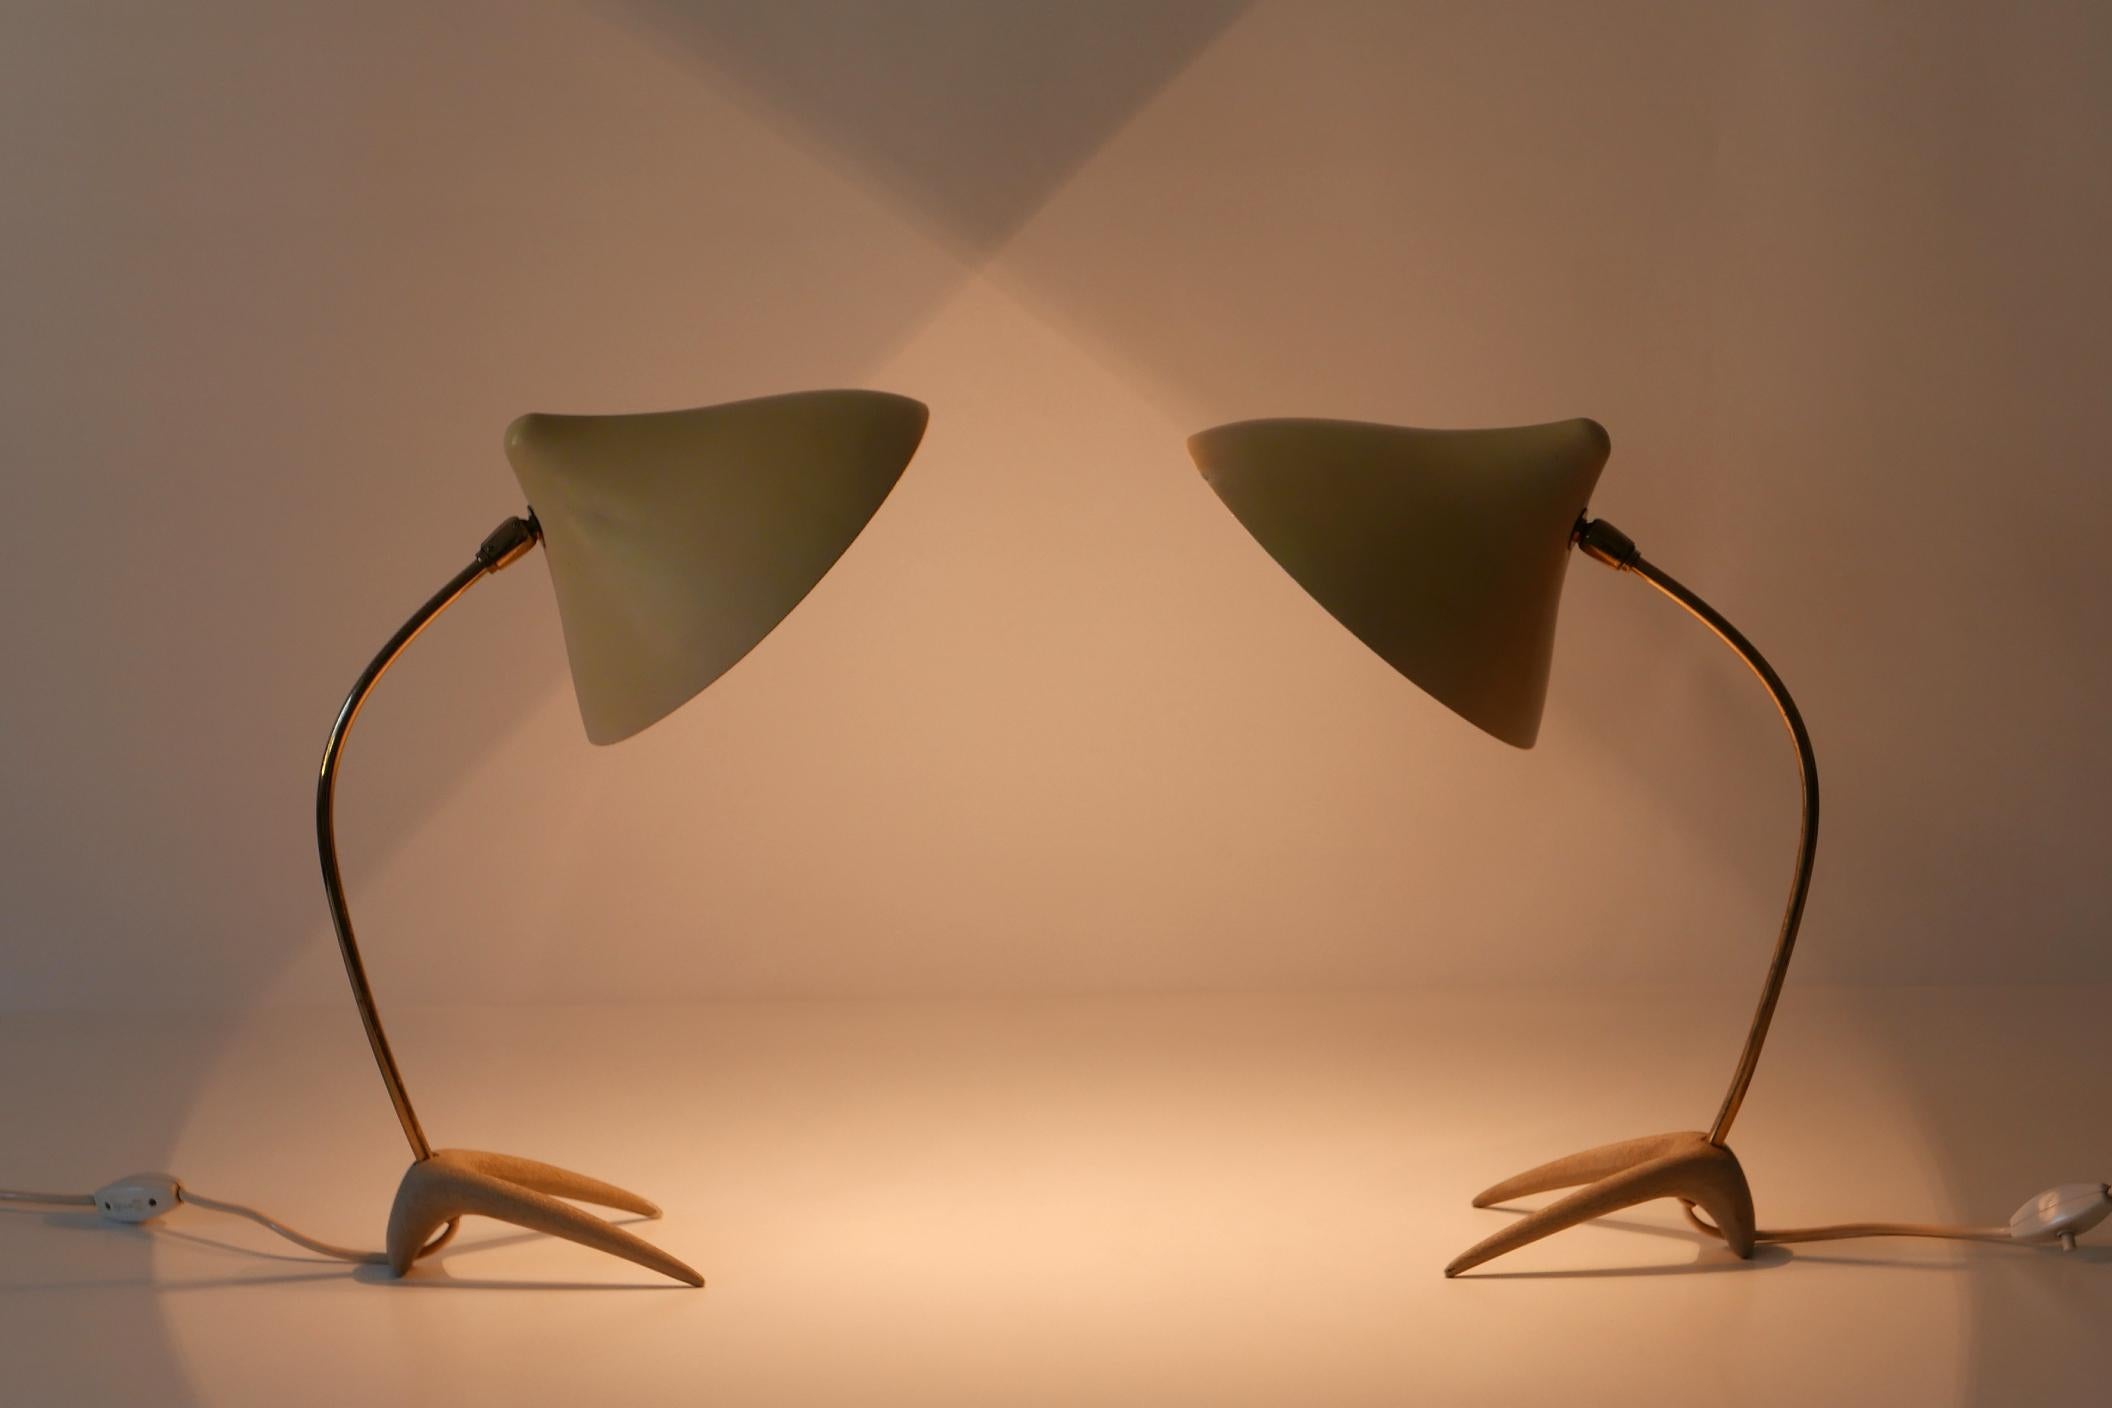 Enameled Set of Two Lovely Mid-Century Modern Table Lamps by Louis Kalff for Cosack 1950s For Sale